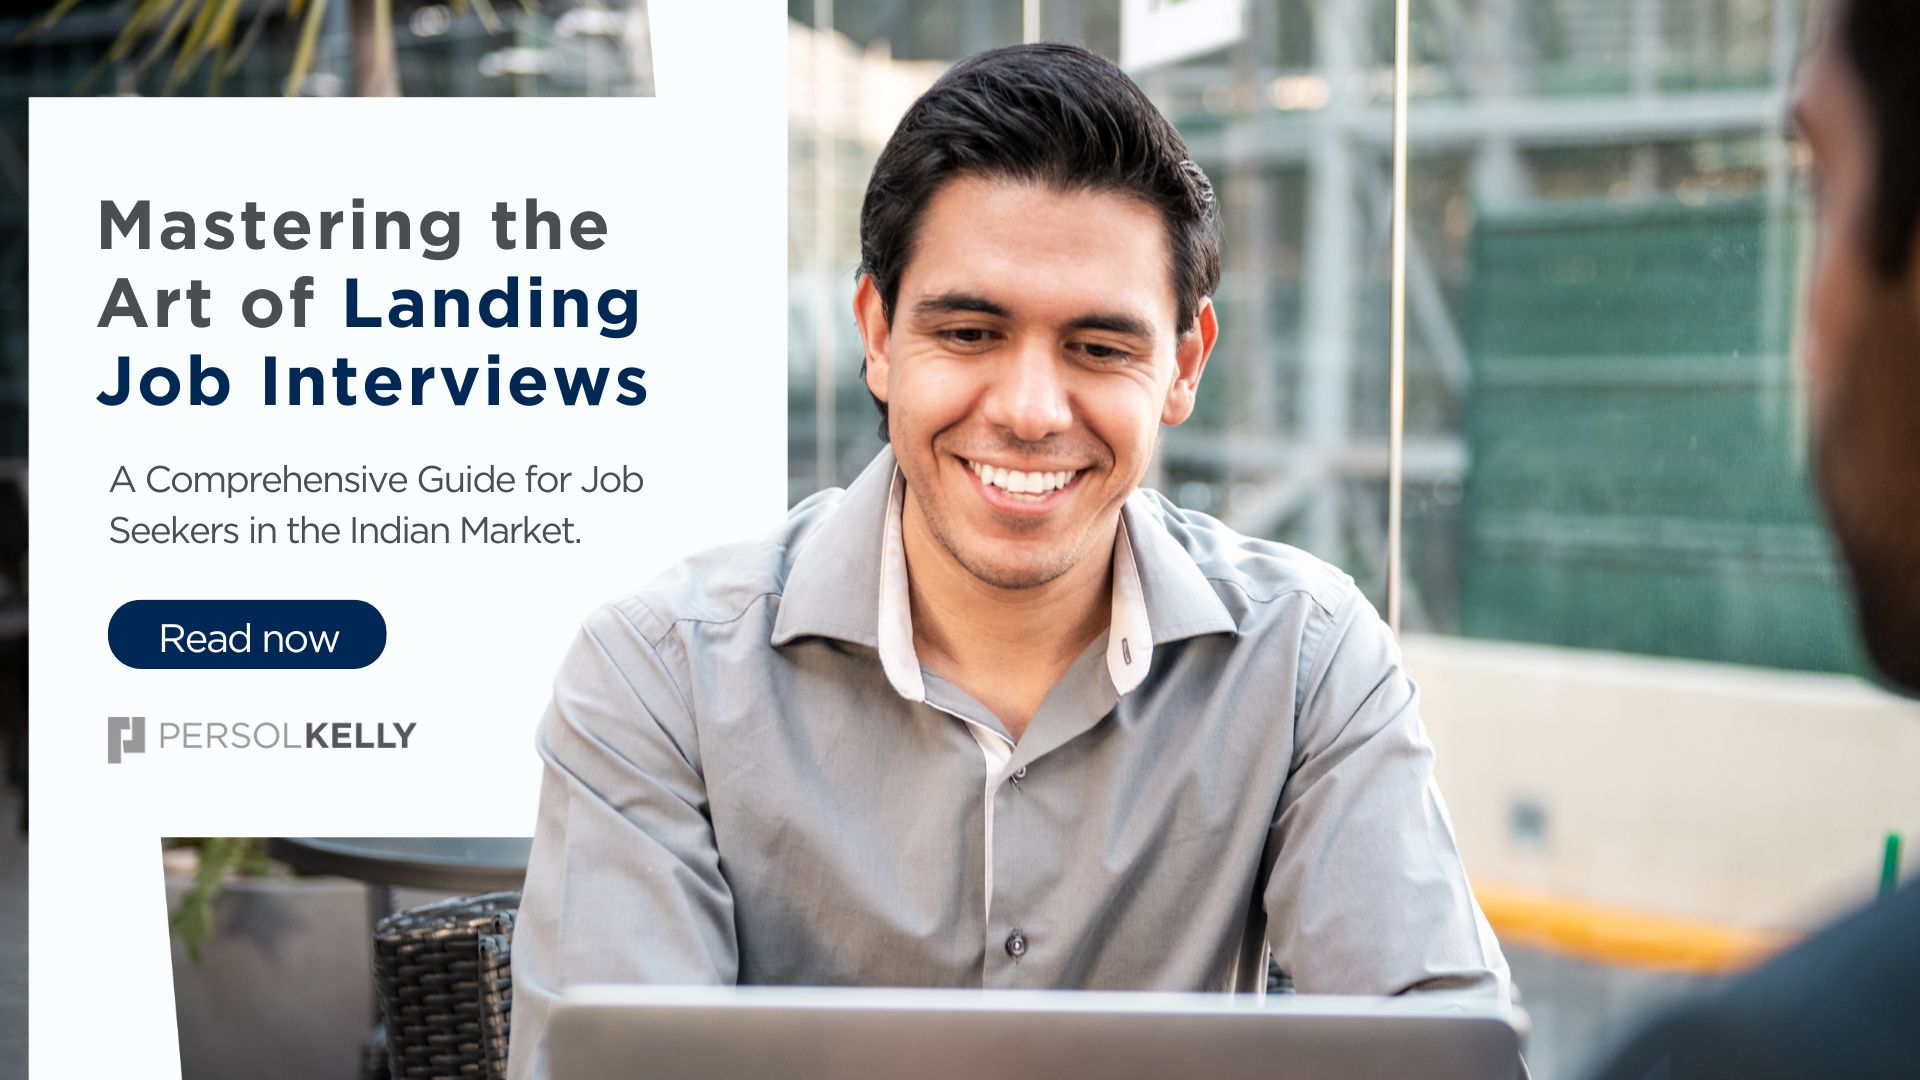 Mastering the Art of Landing Job Interviews: A Comprehensive Guide for Job Seekers in the Indian Market